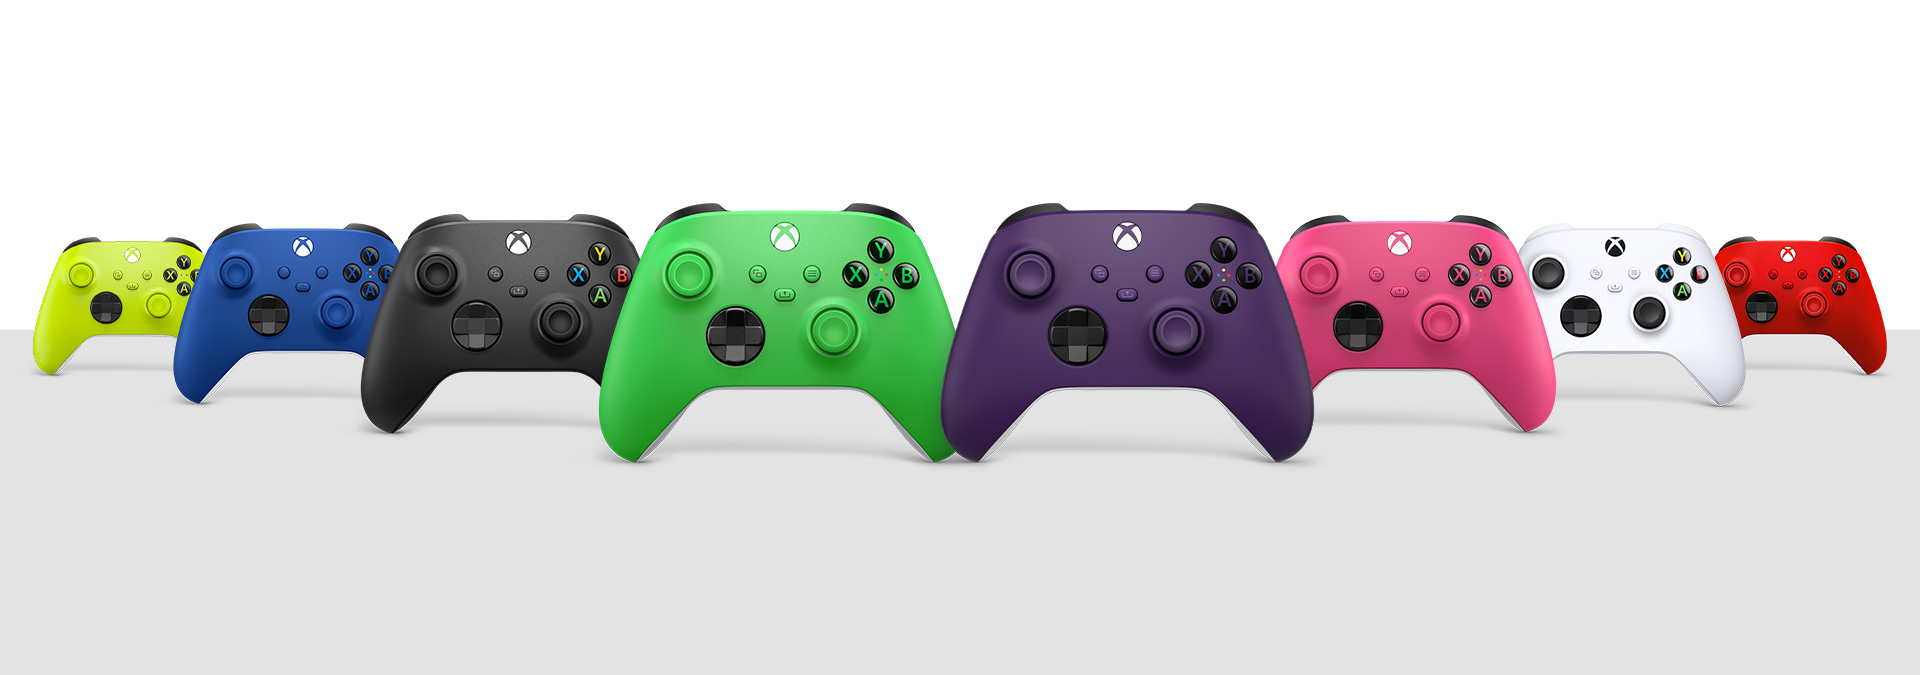 Xbox Wireless Controller Carbon Black, Robot White, Shock Blue, Pulse Red, Electric Volt, Deep Pink, Velocity Green und Astral Purple